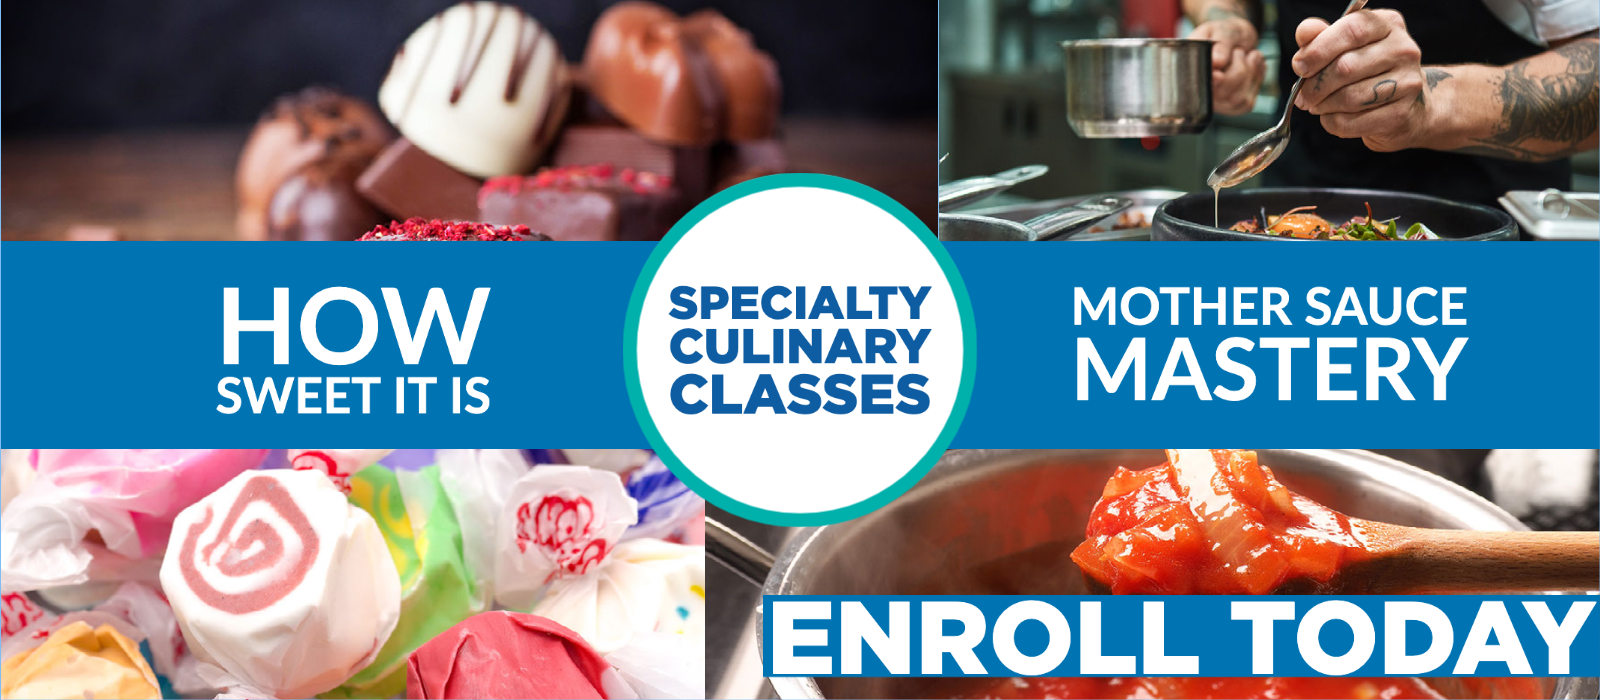 IMAGES OF CANDY AND SAUCES TO PROMOTE SPECIALTY CULINARY CLASSES